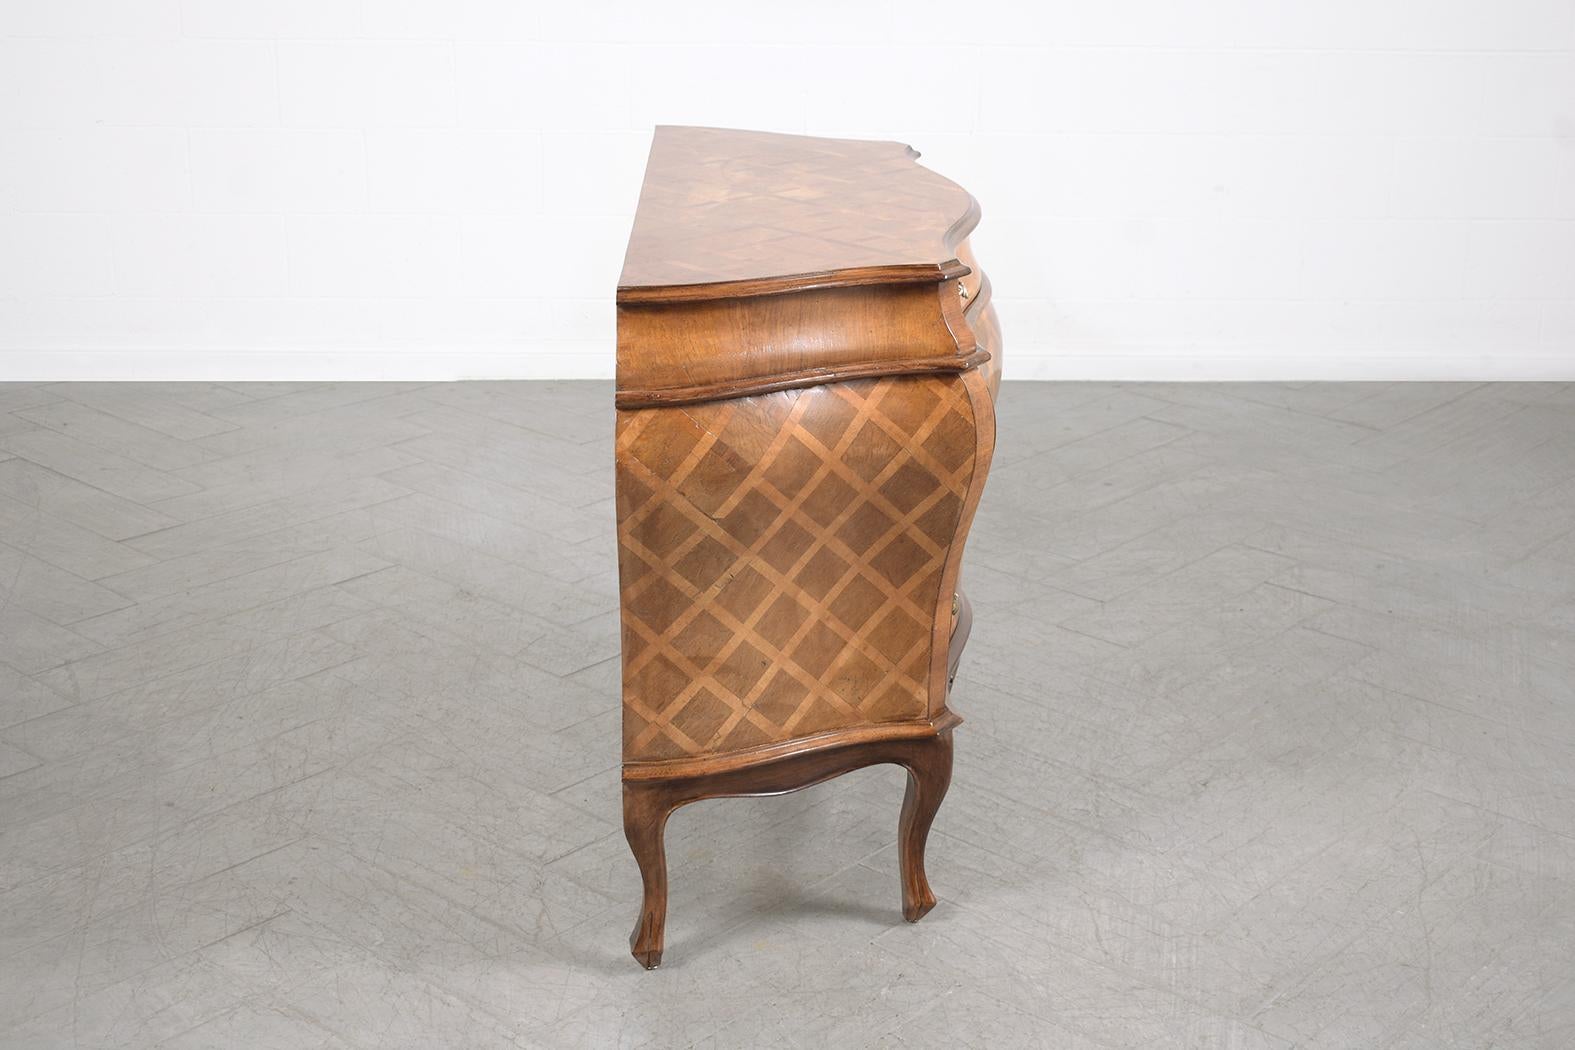 Italian Vintage Commode: Restored Wood and Marquetry Veneer Bombay Chest 5